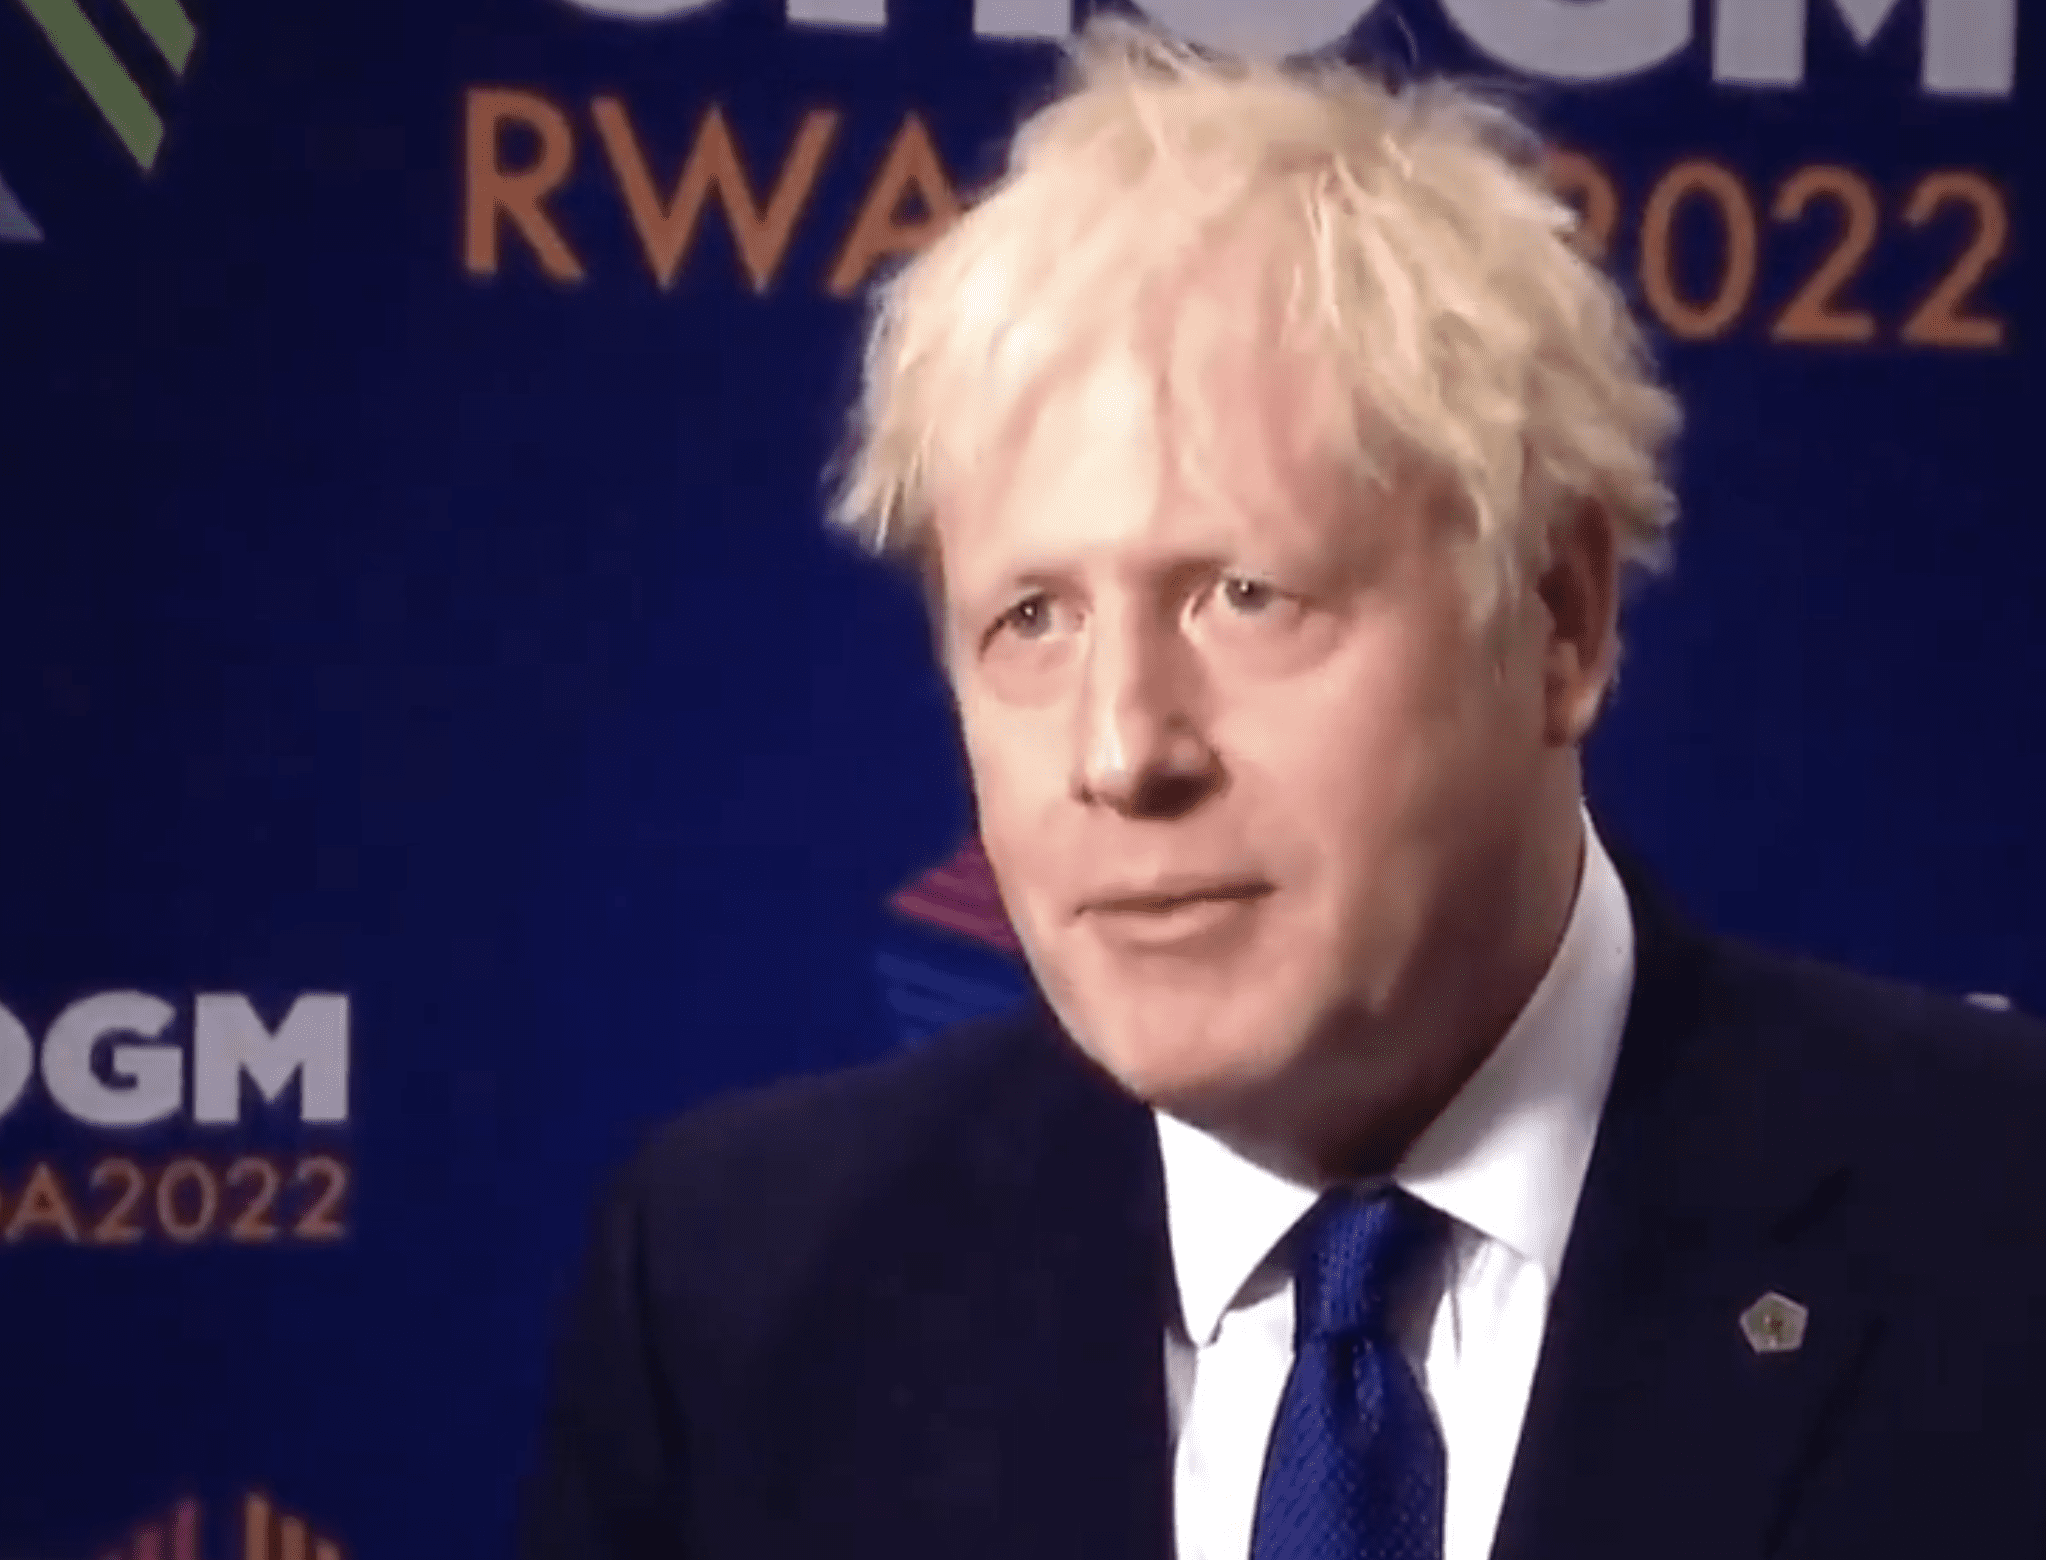 Watch: Johnson’s grovelling apology in response to by-election results is debunked